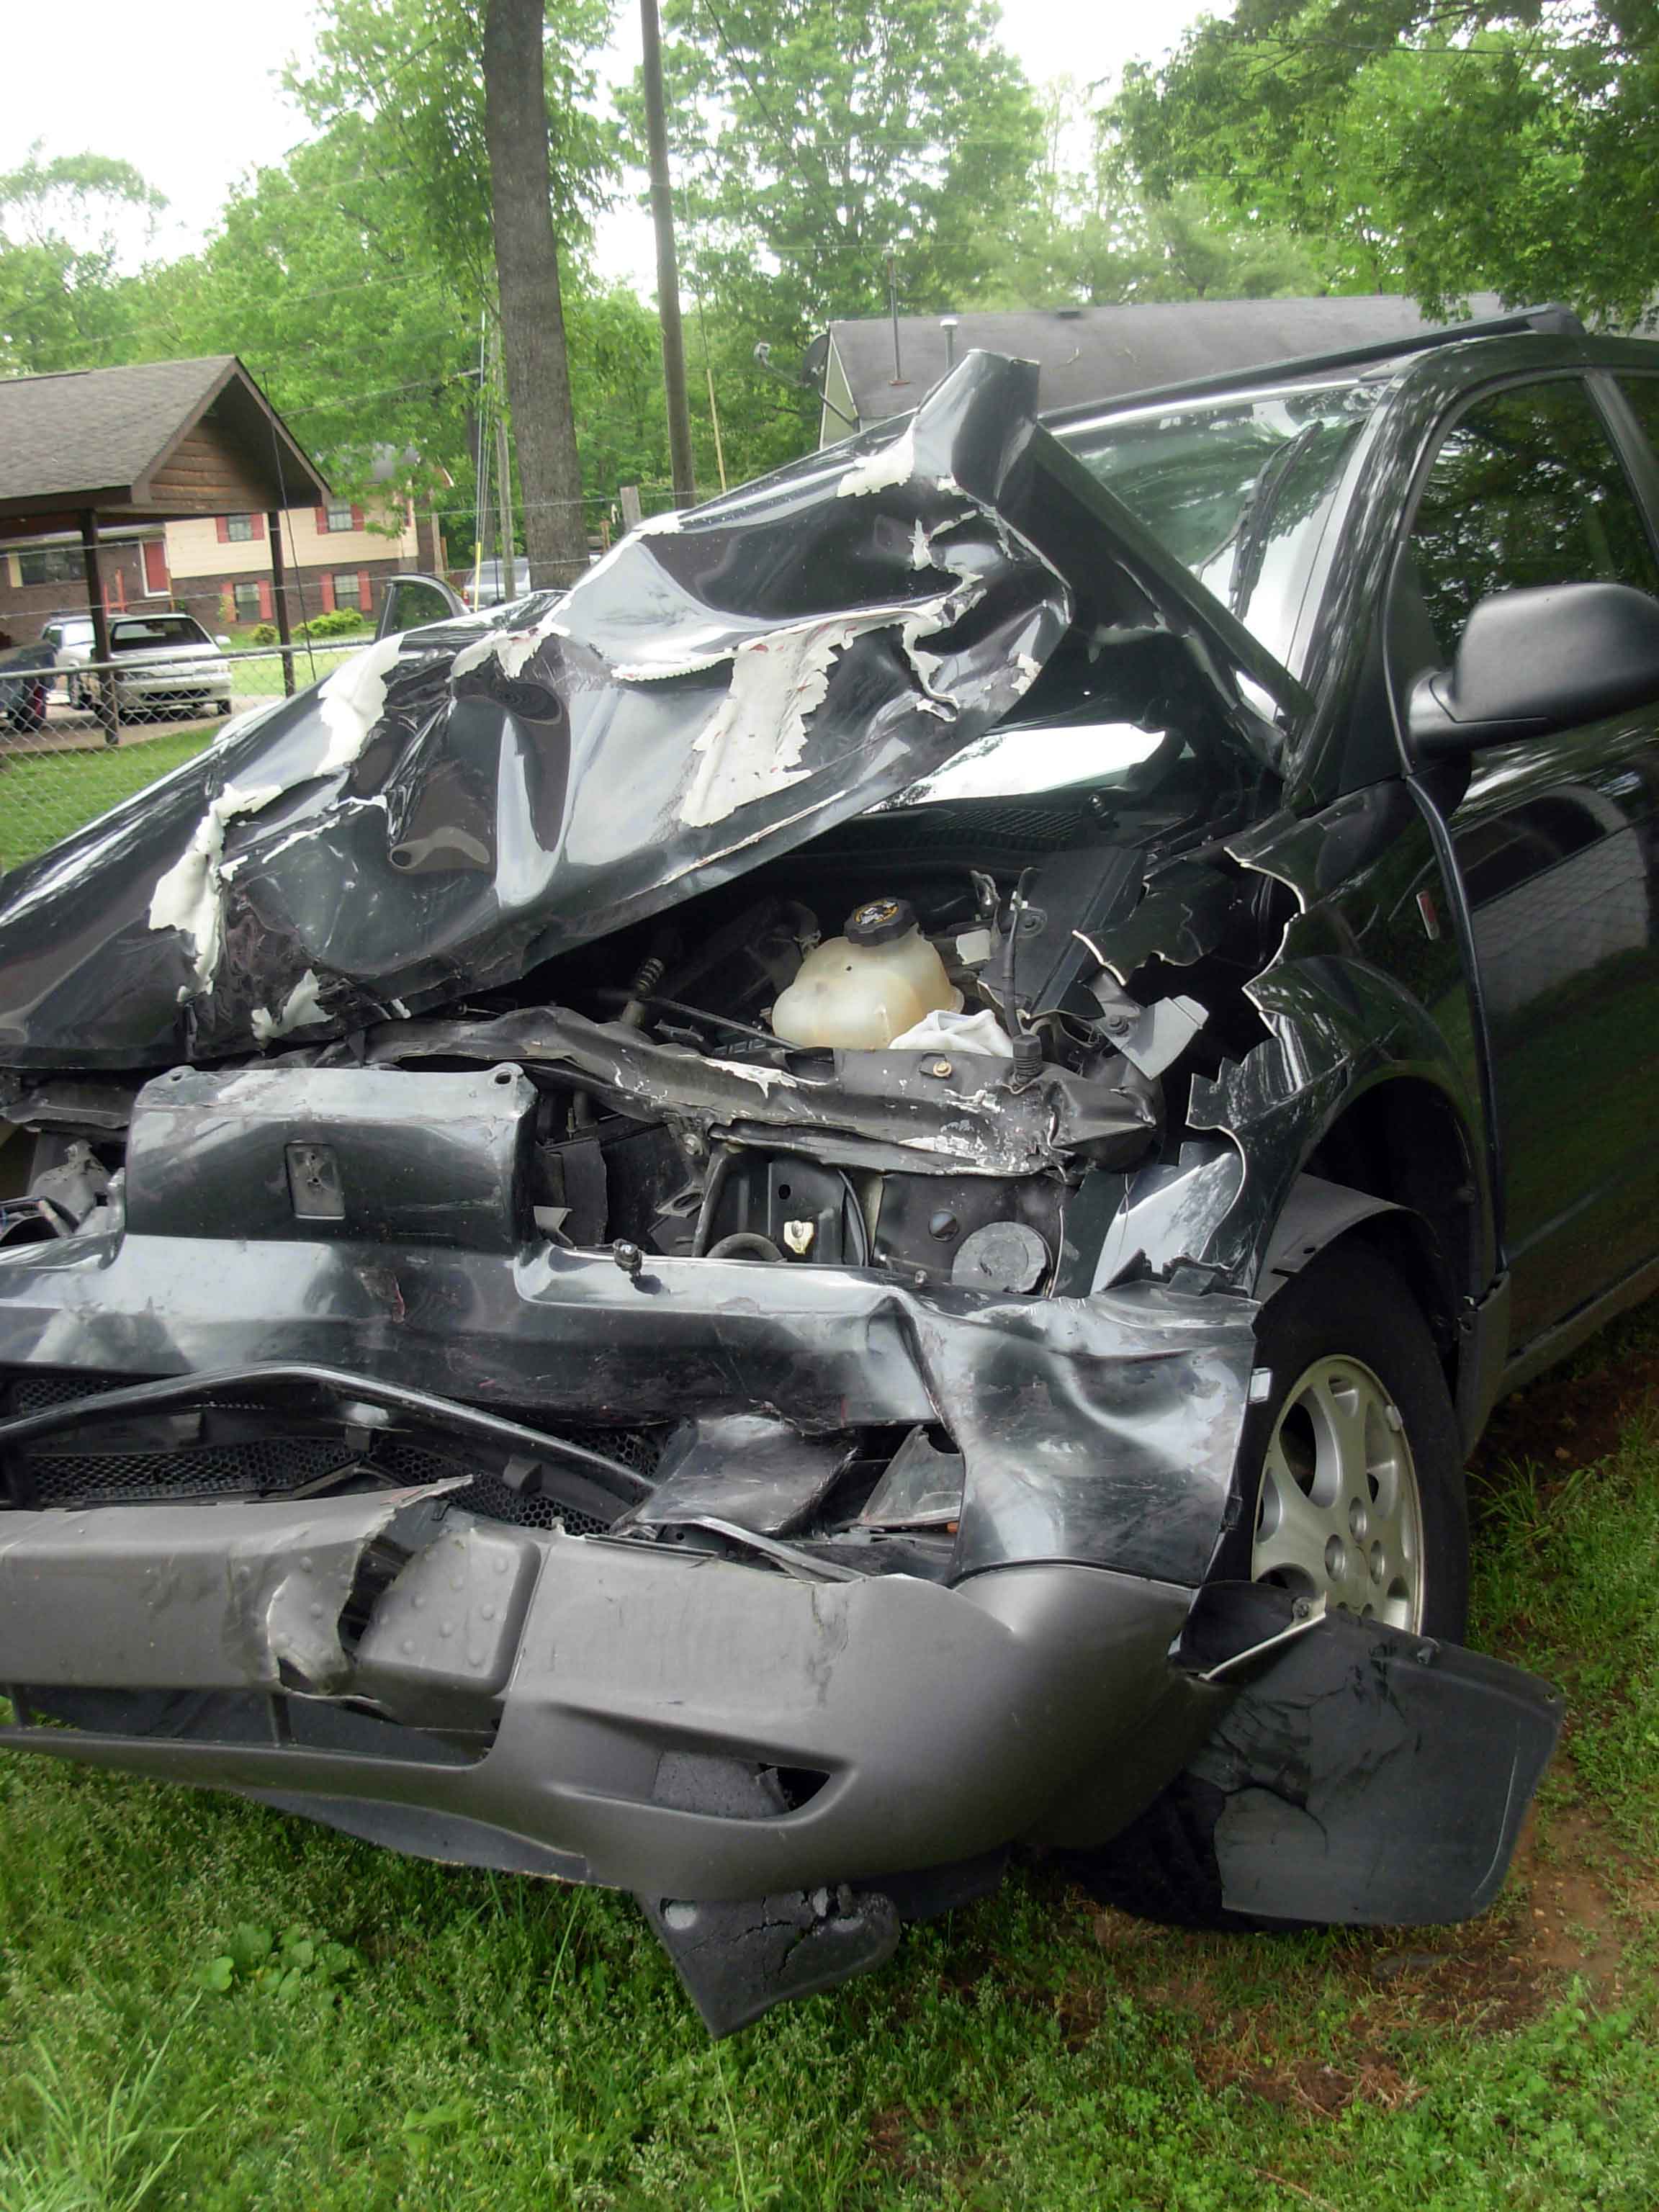 Download this Car Accident May picture